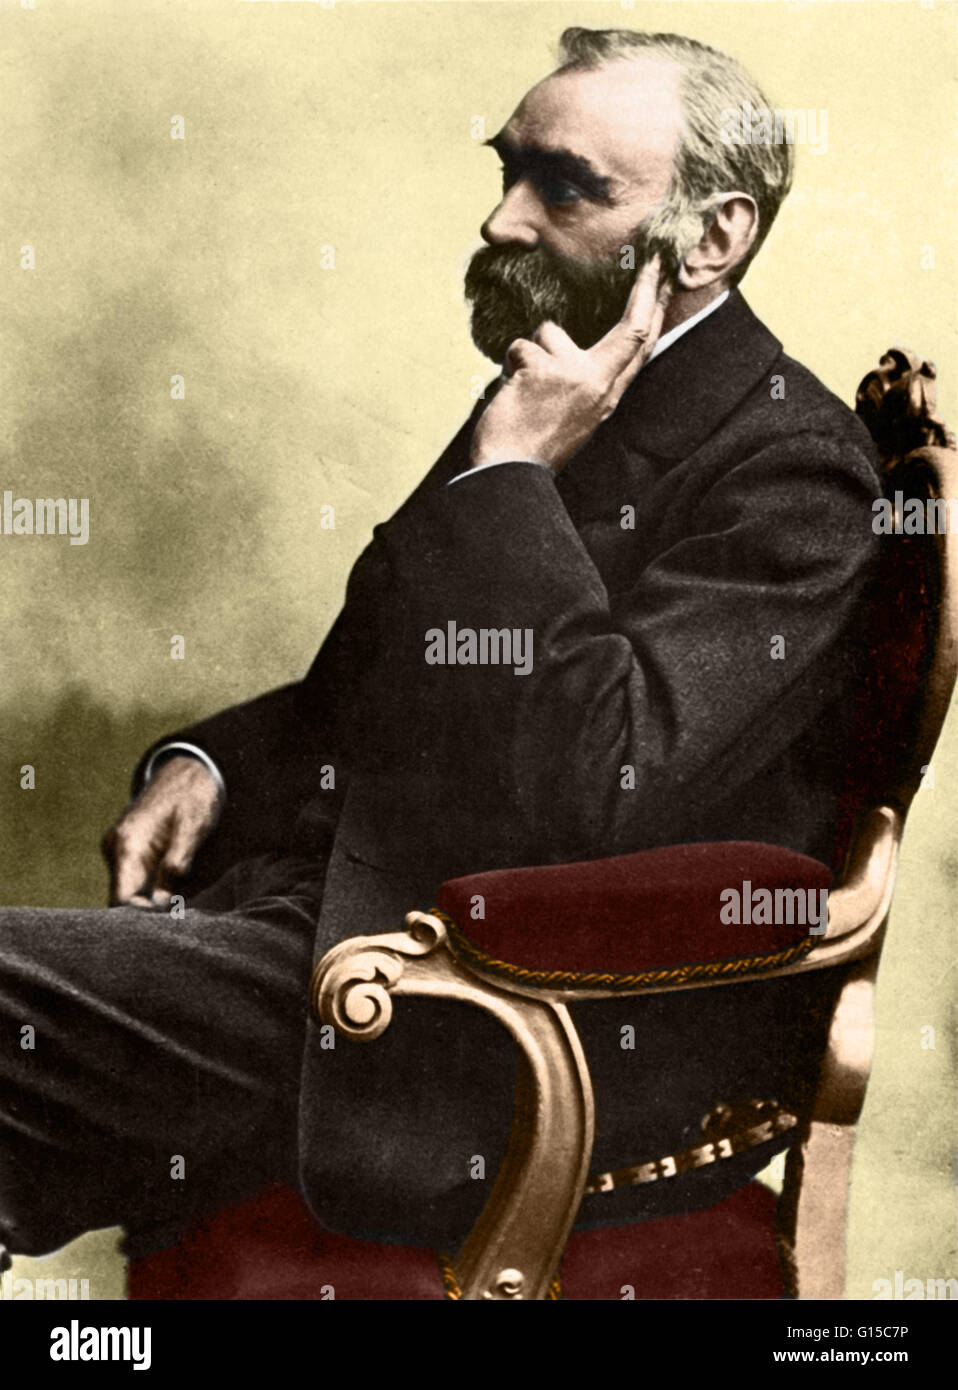 Alfred Bernhard Nobel (October 21, 1833 - December 10, 1896) was a Swedish chemist and inventor, joined his father in the business of manufacturing explosives. He studied explosives like nitroglycerin, and discovered ways to make them safer to use. In 186 Stock Photo